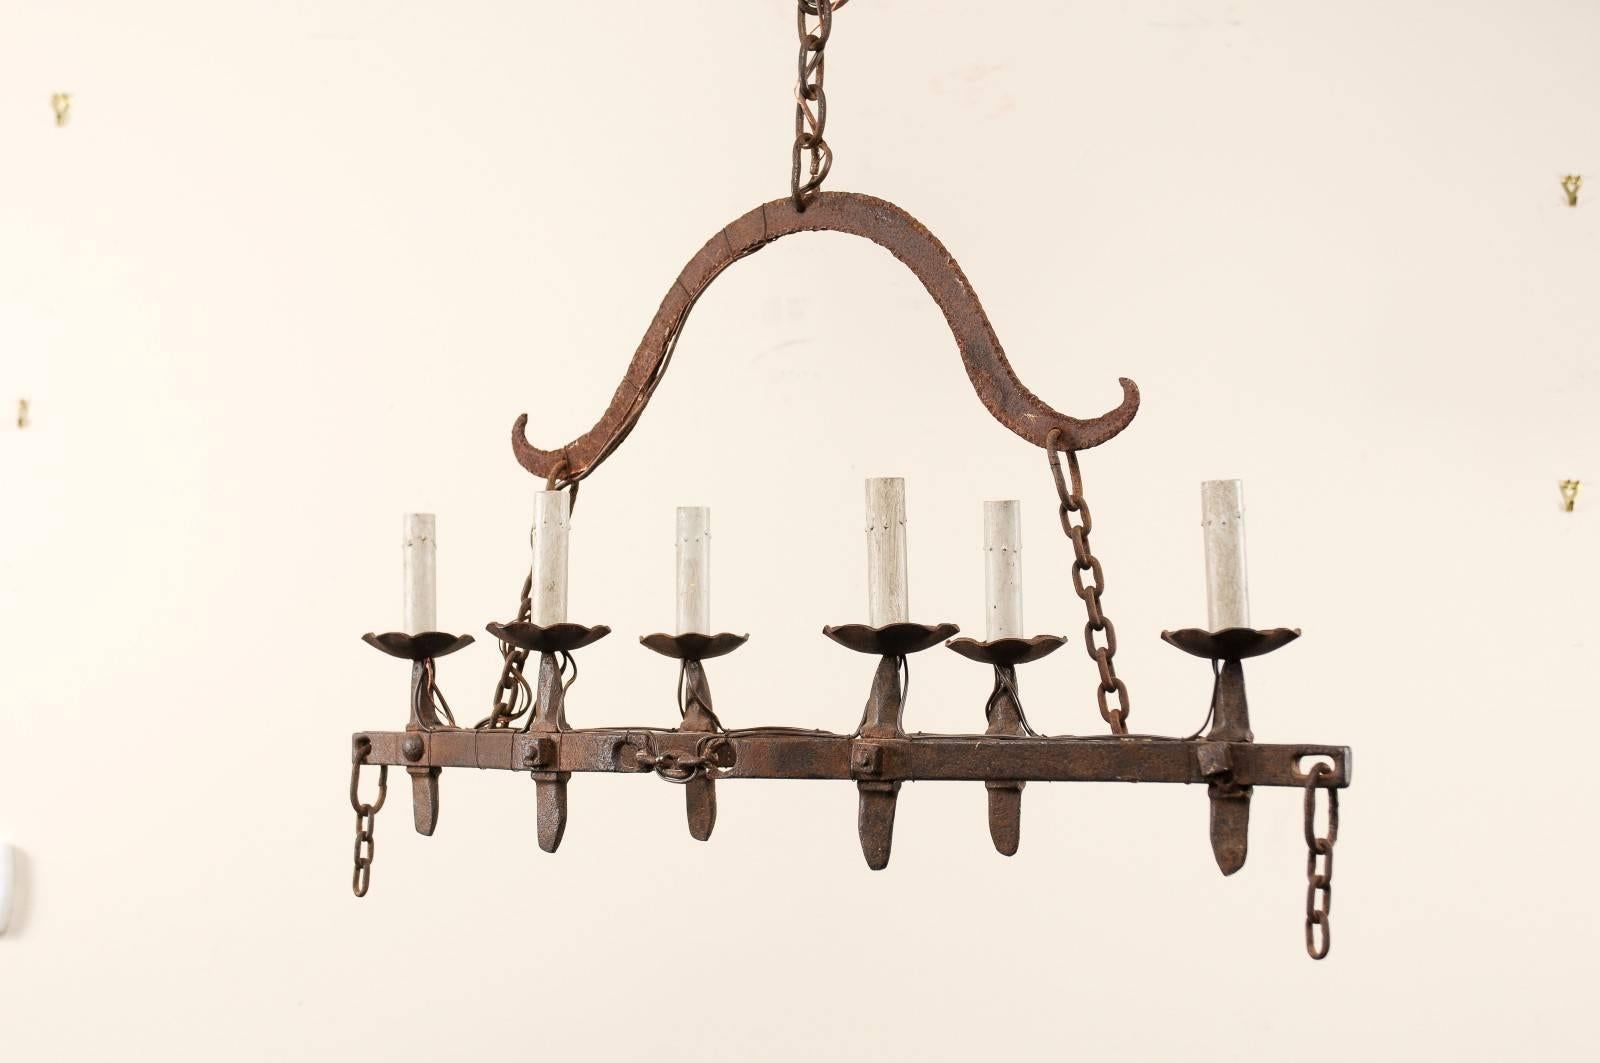 A vintage French six-light iron chandelier. This French midcentury chandelier features a centre piece that could best be described as boat shaped, with two cross bars at it's centre. There are six arms mounted around it's perimeter, which are topped